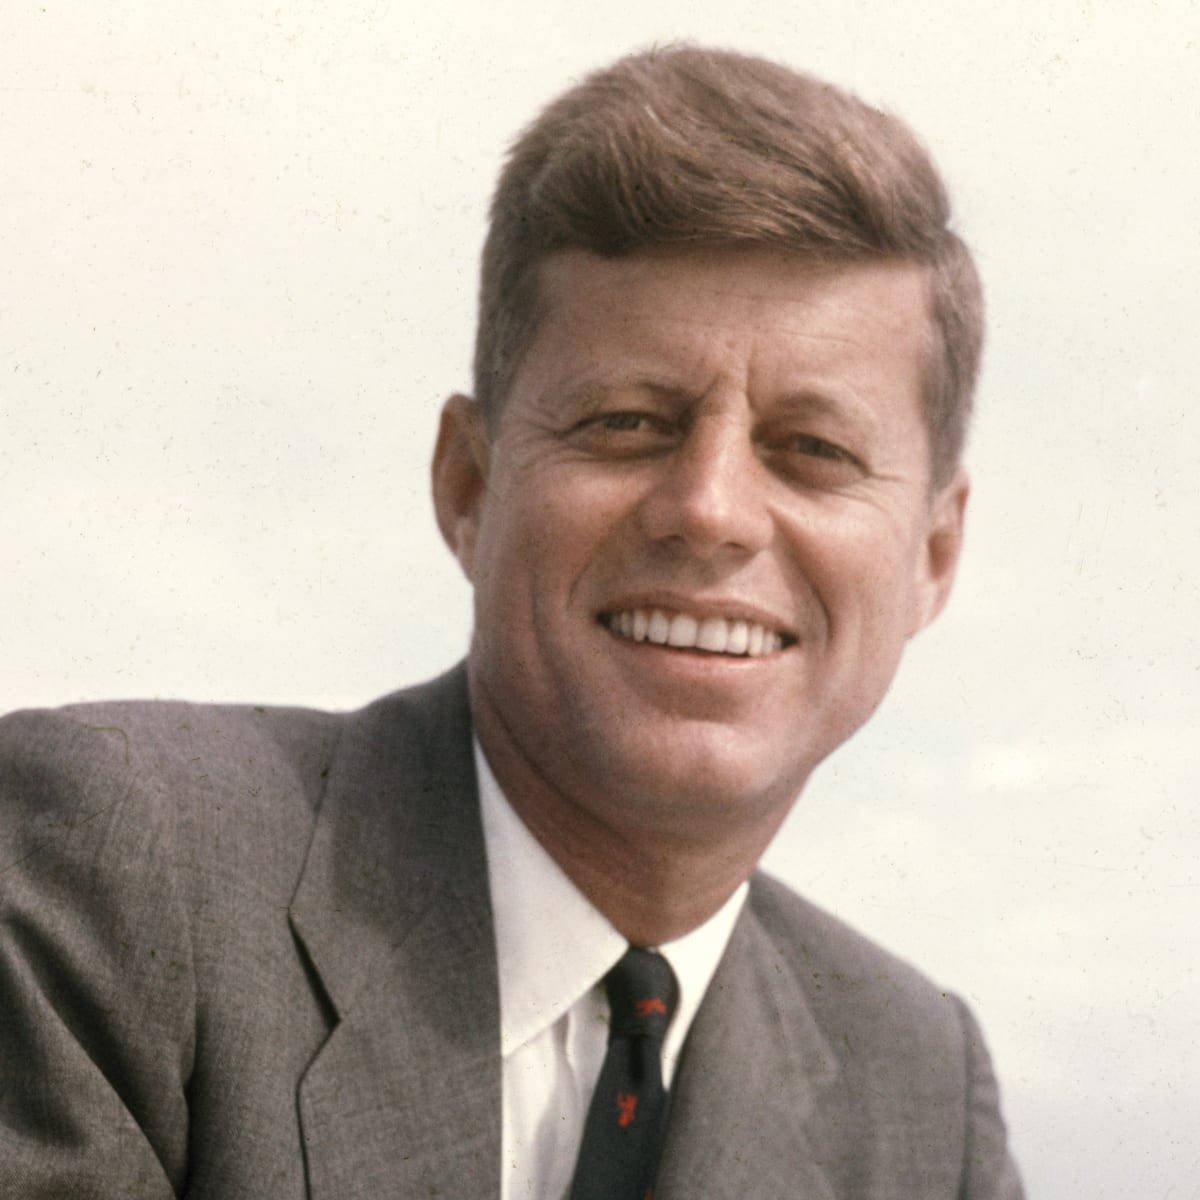 Brown-haired John F. Kennedy